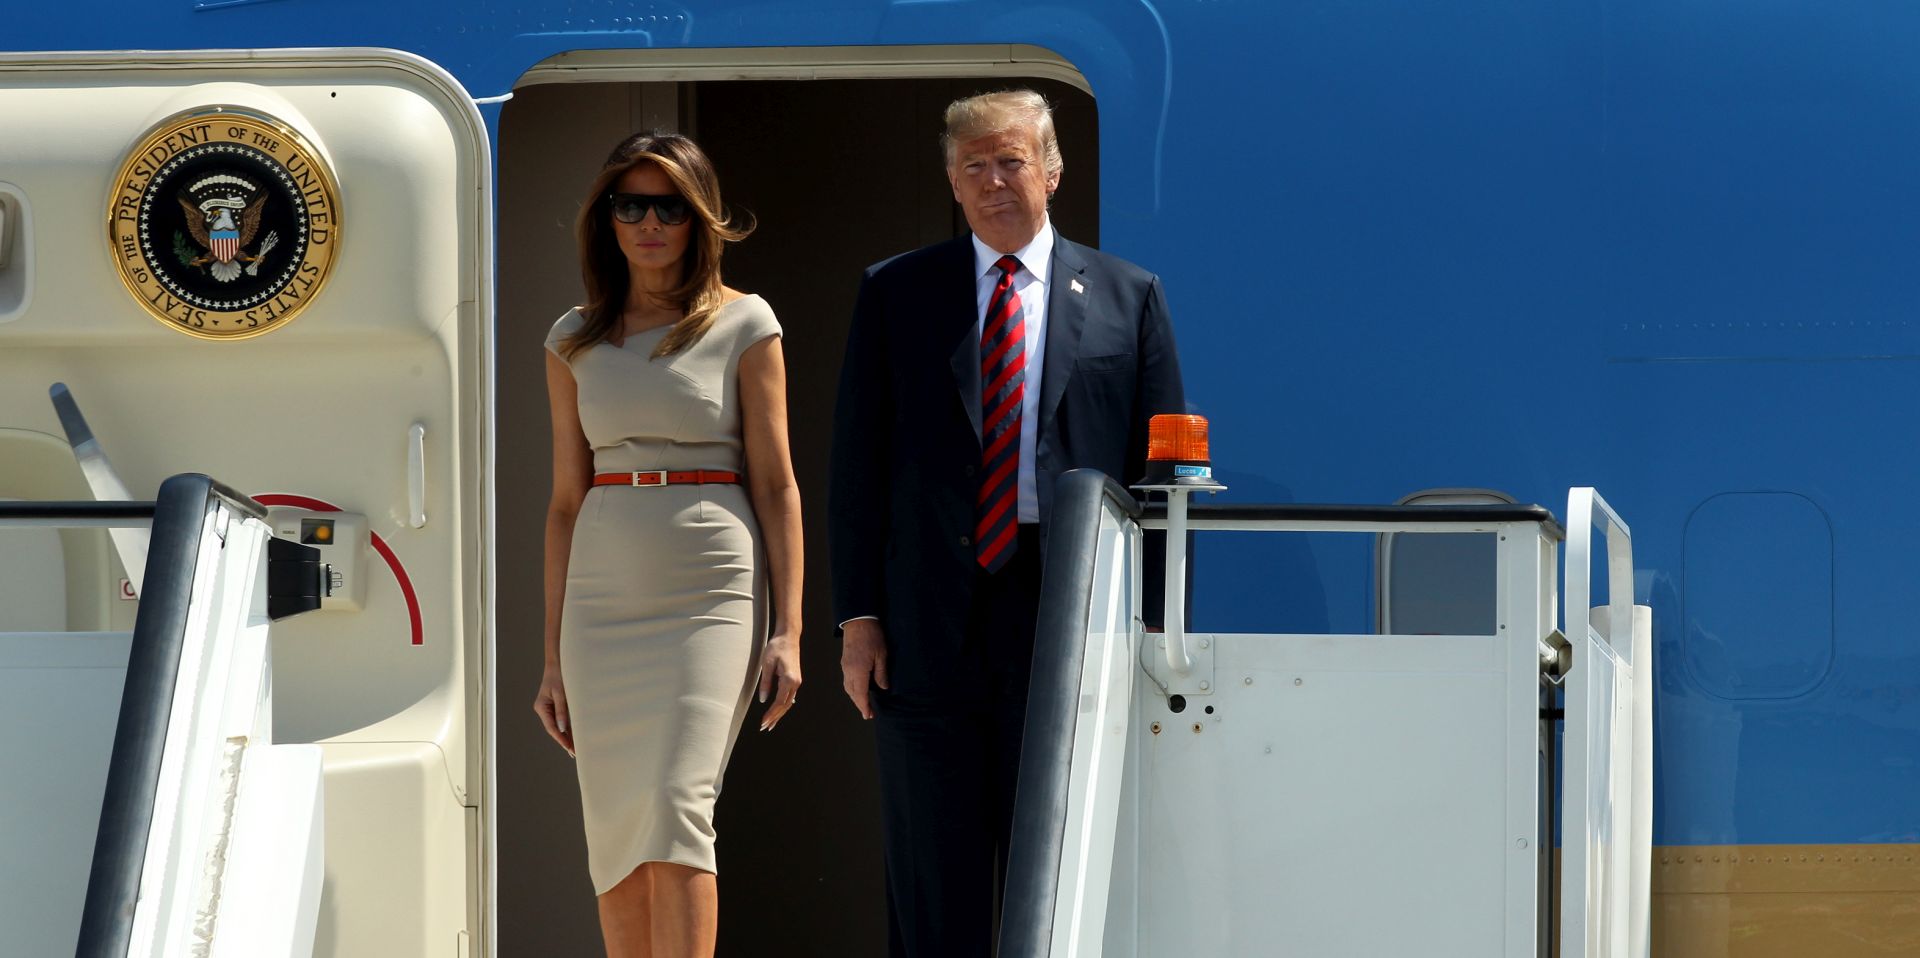 epa06883748 US President Donald J. Trump (R) and his wife Melania Trump (L) walk down from their plane as they arrive for their first offical visit to the UK at the London Stansted Airport in Essex, Britain, 12 July 2018. US President Trump is on a three-day working visit to the United Kingdom.  EPA/SEAN DEMPSEY